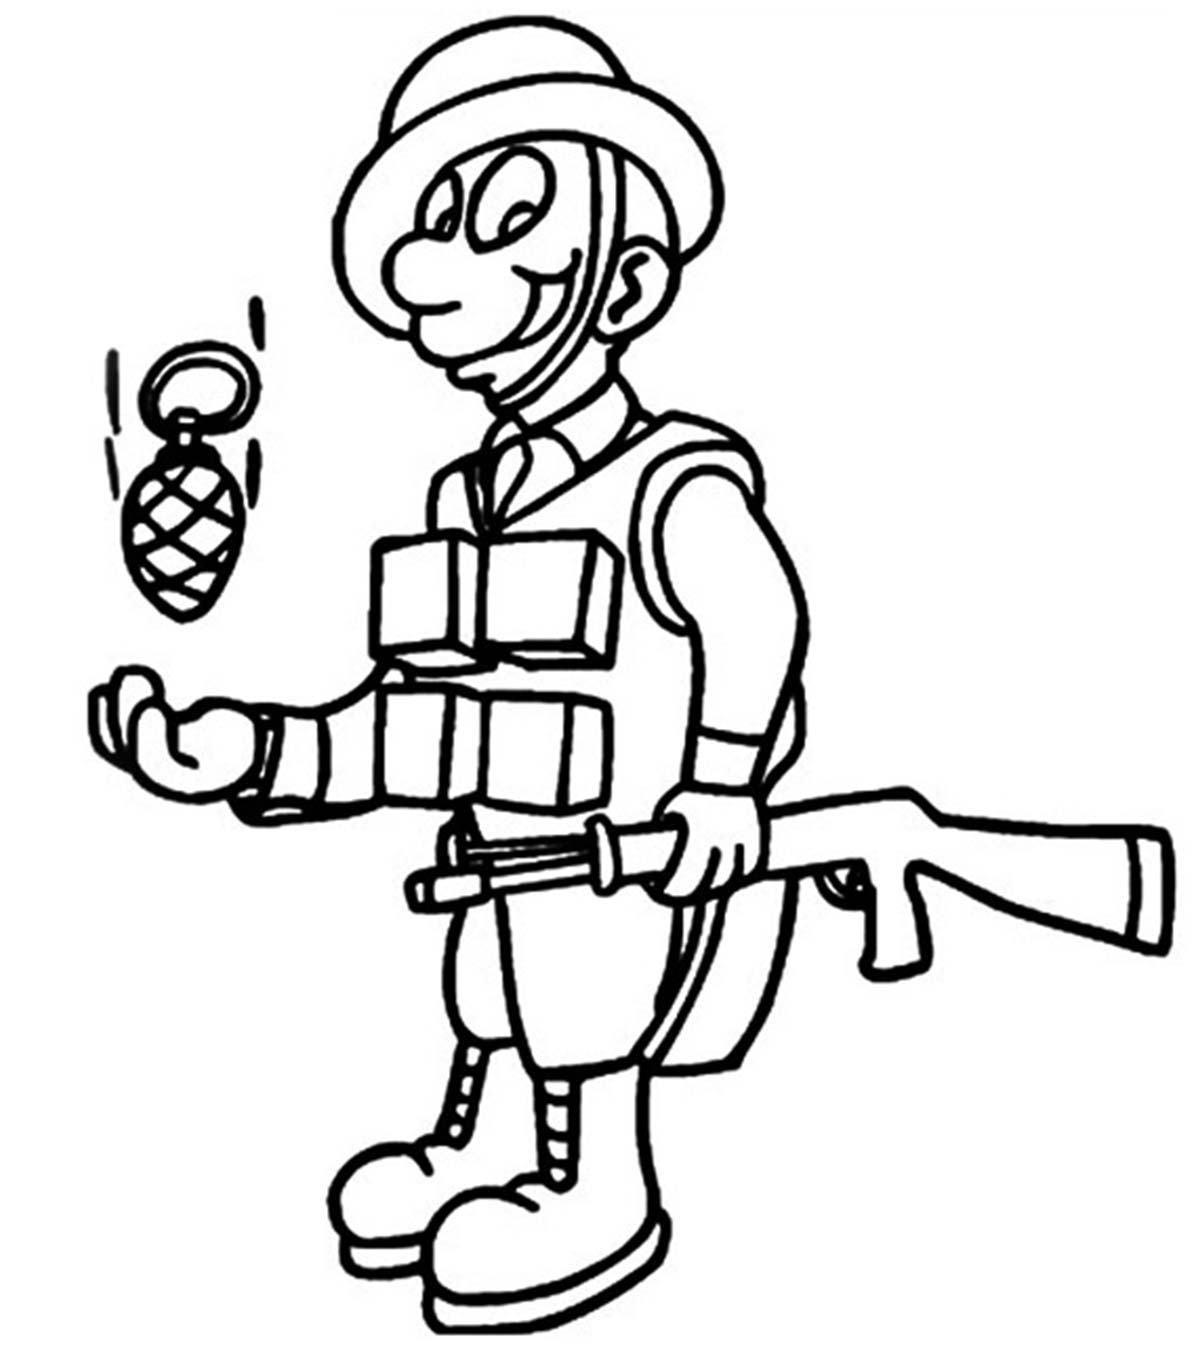 Top 10 Soldier Coloring Pages For Your Toddler